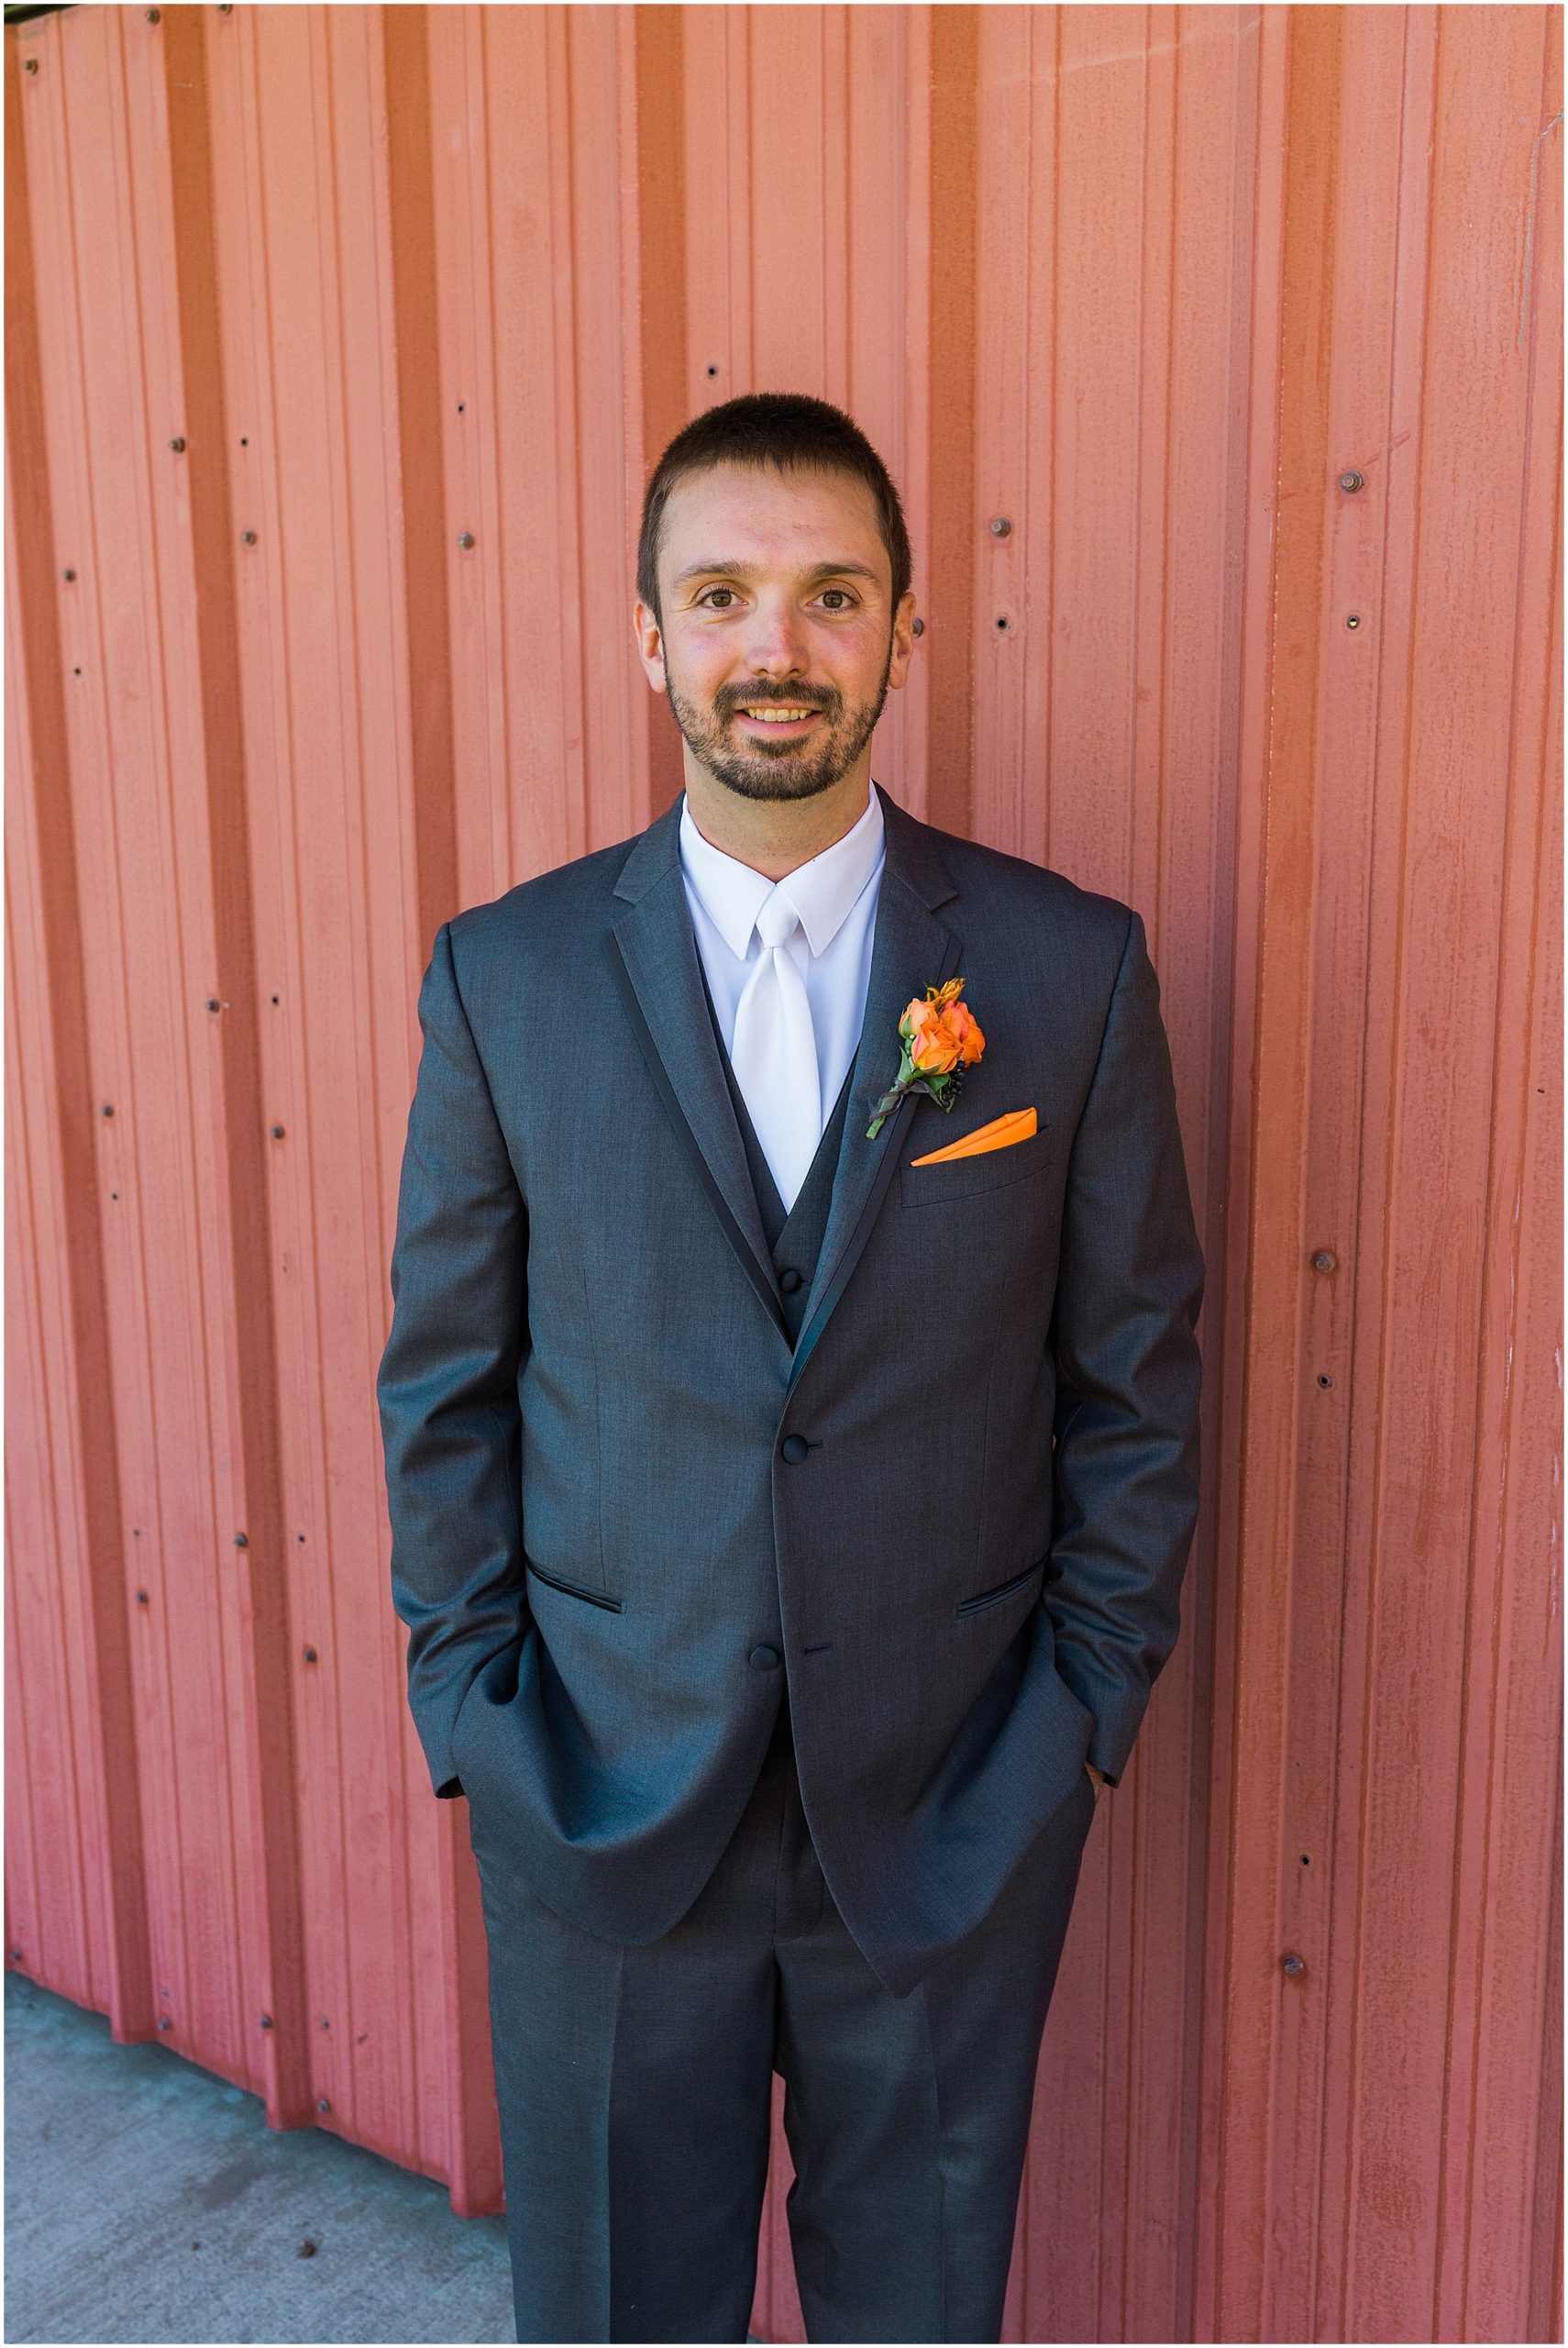 This handsome groom poses in front of the red metal doors at the Hollinshead Barn Fall wedding venue in Bend, OR. | Erica Swantek Photography